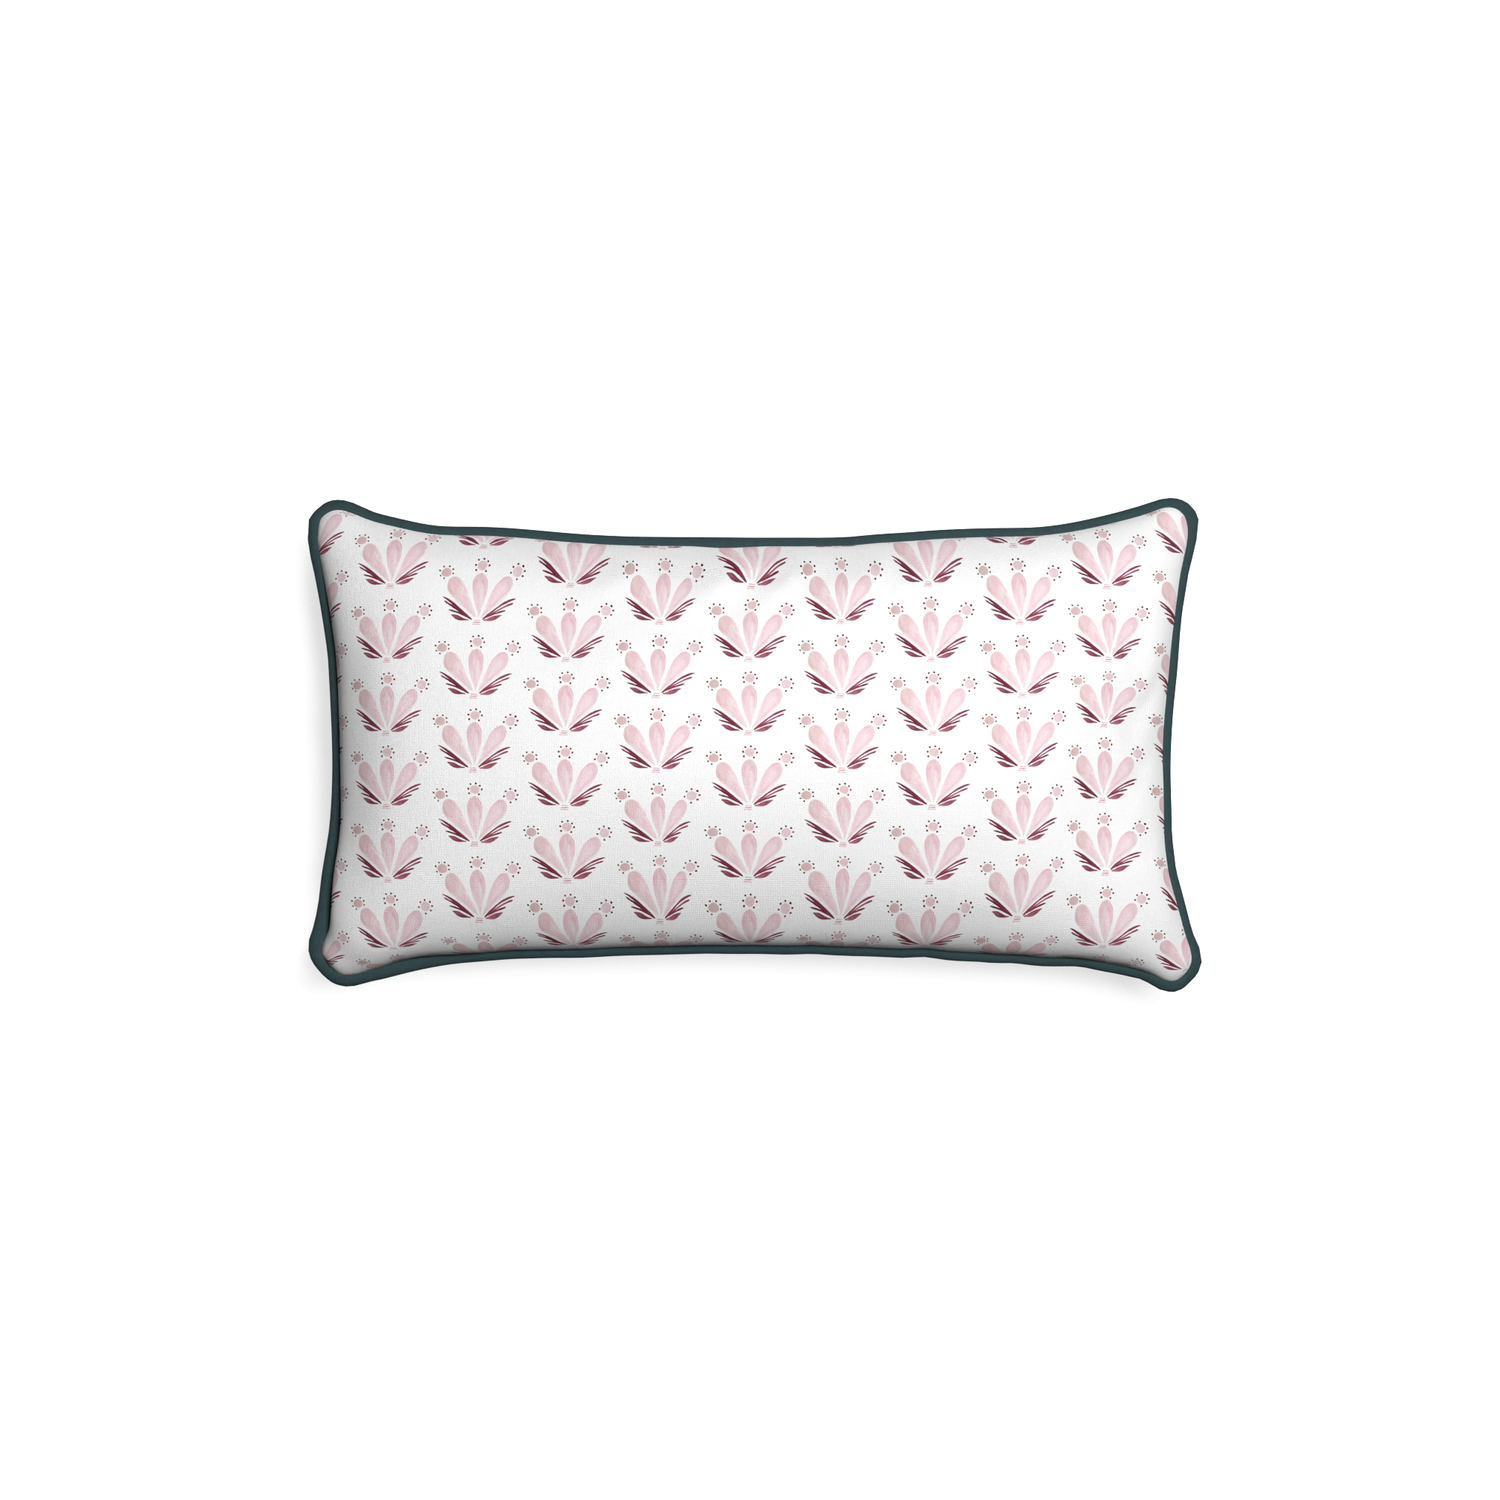 Petite-lumbar serena pink custom pink & burgundy drop repeat floralpillow with p piping on white background